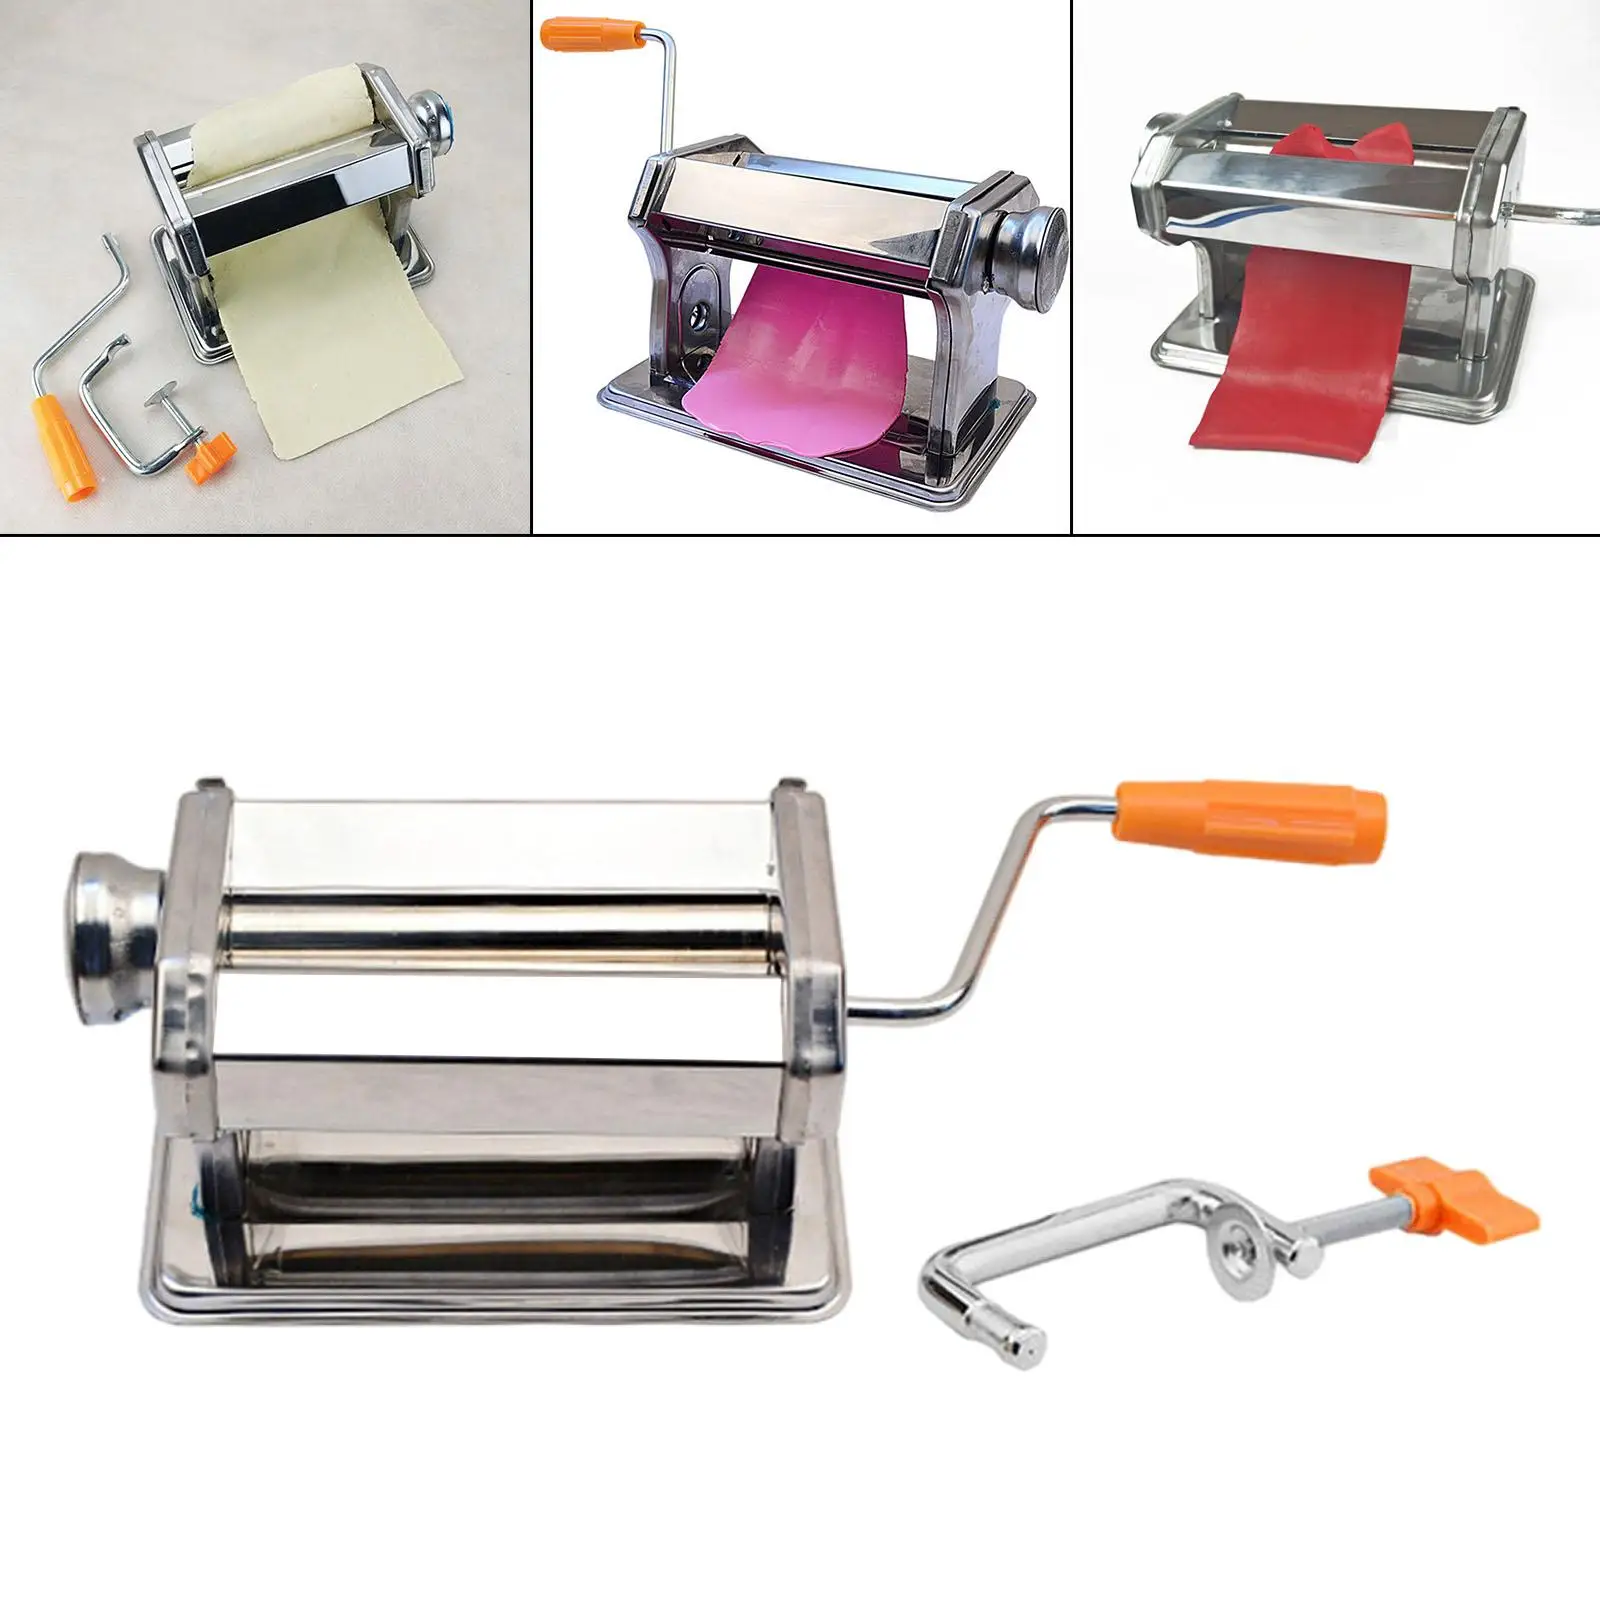 Clay Conditioning Machine Blending Colors Manual Clay Extruder Clay Accessory Nonelectric Clay Pressure Machine for Polymer Clay